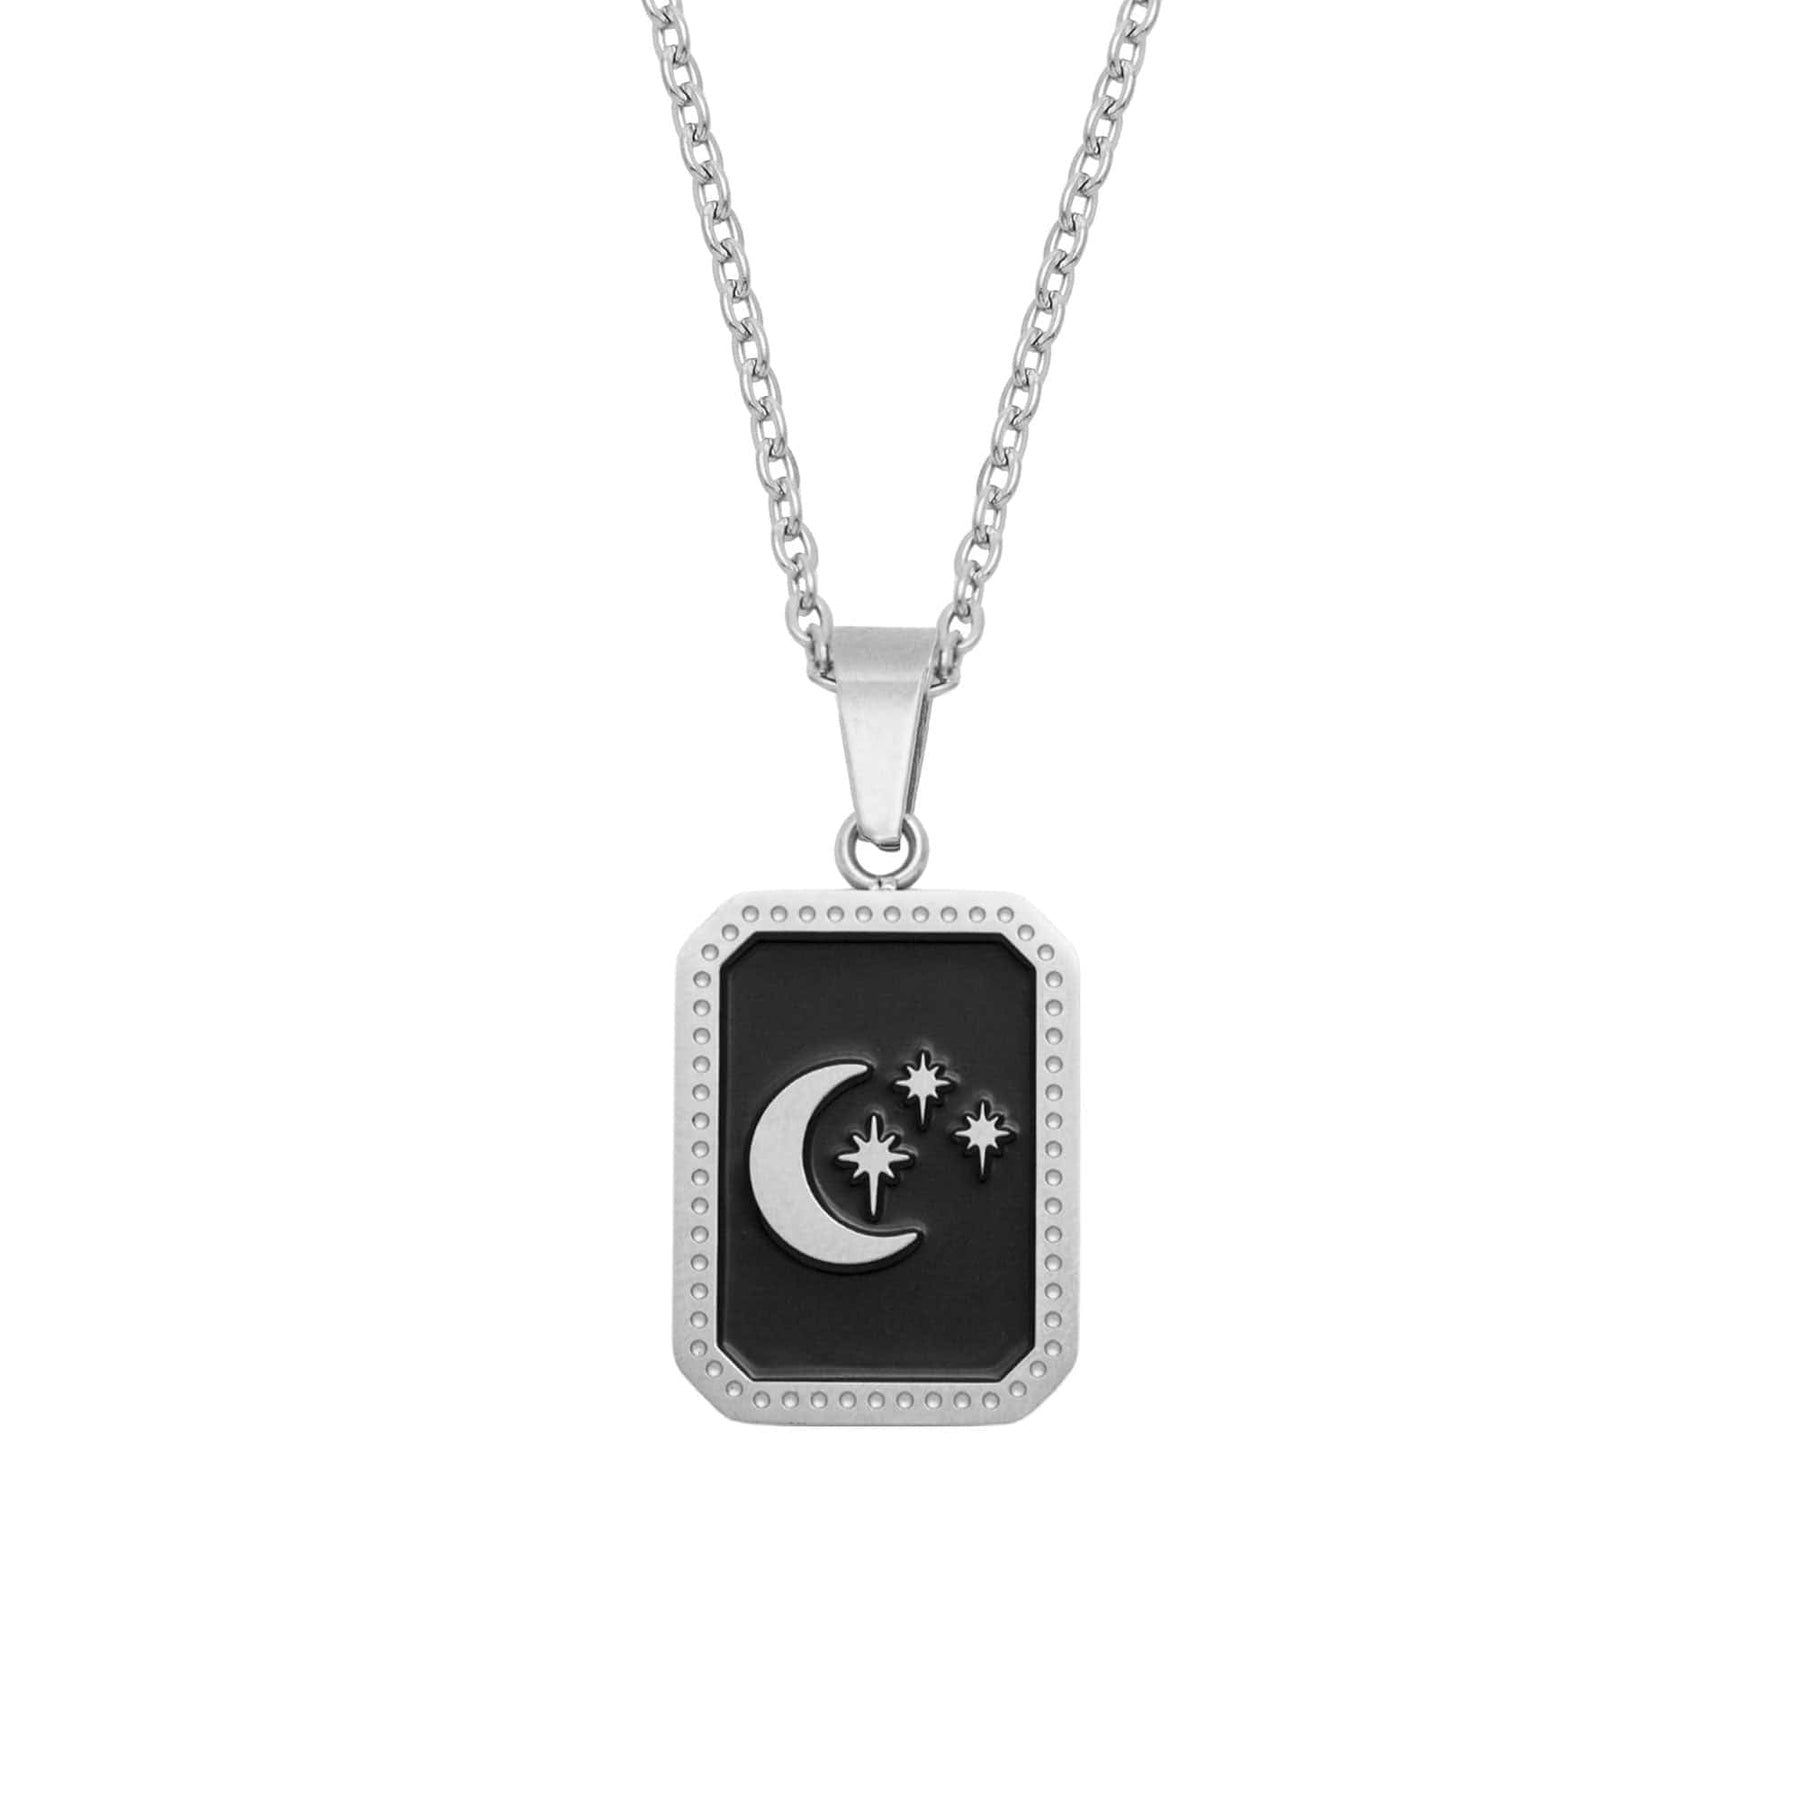 BohoMoon Stainless Steel Carli Necklace Silver